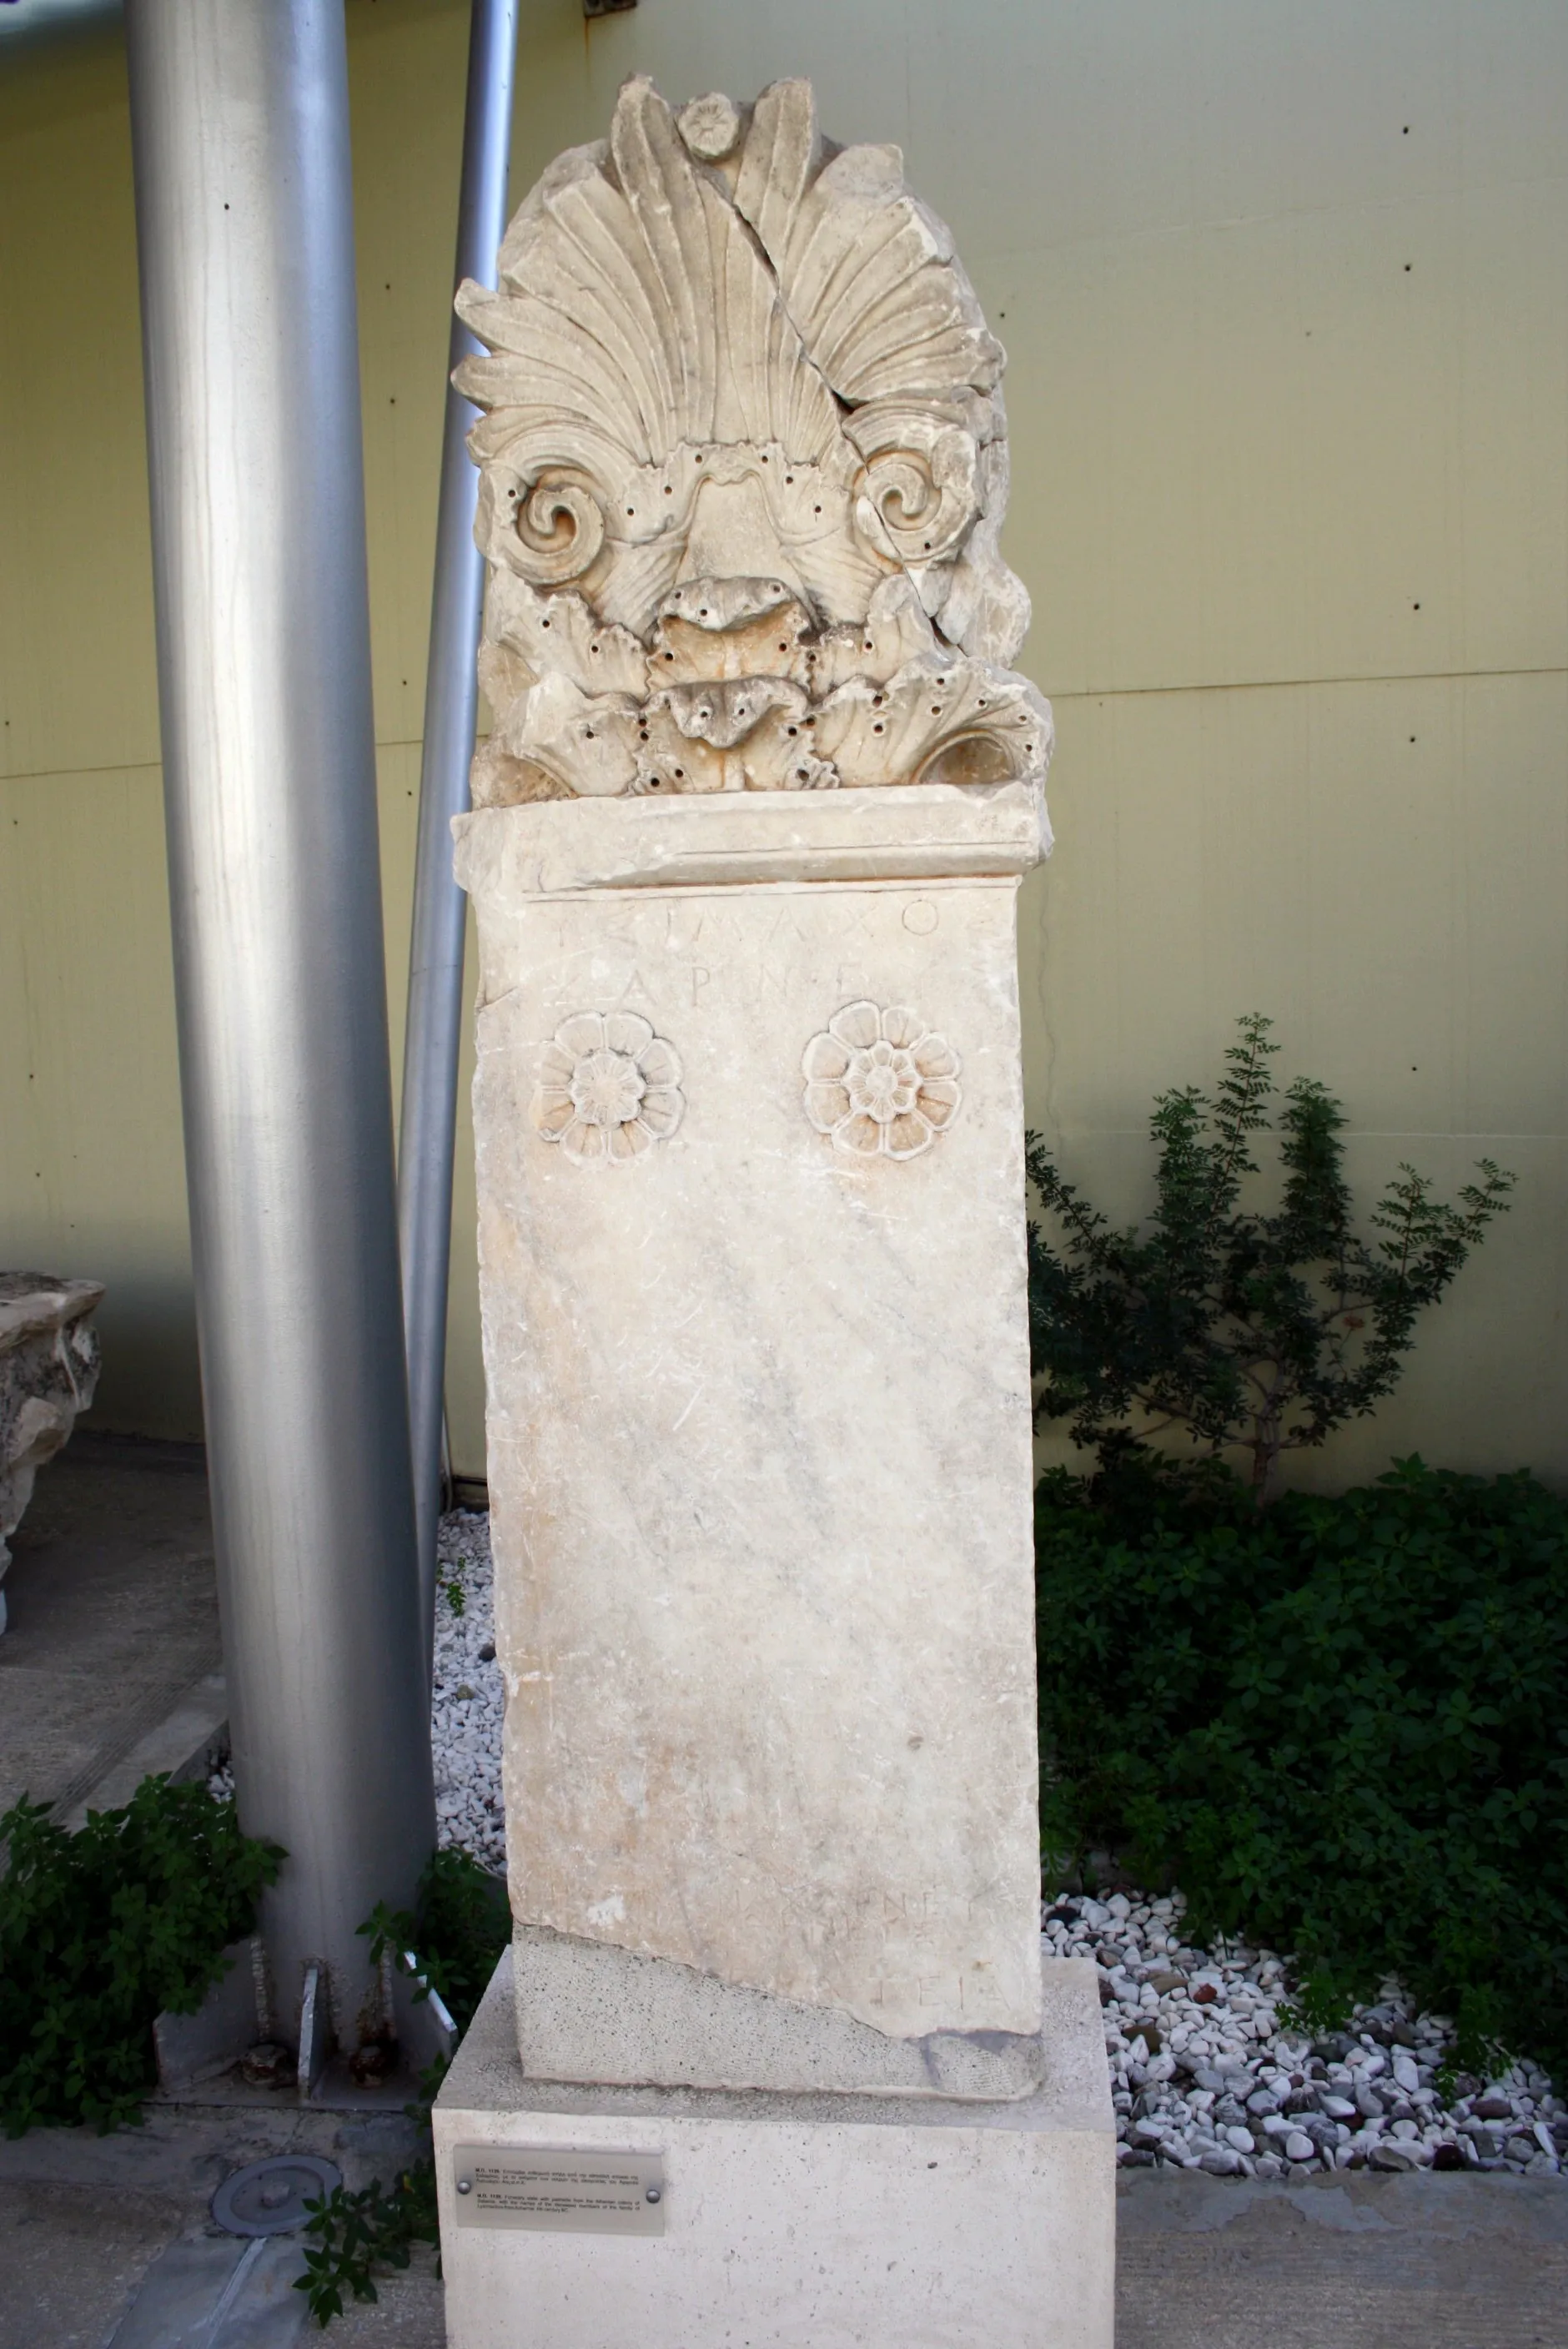 Photo showing: Stele bearing the names of Lysimachos of Acharnae ad his family, from the Athenian colony of Samos. 4th century BC. On display at the open-air exhibition along the Ancient Greek theater in the Archaeological Museum of Piraeus (Athens). Picture by Giovanni Dall'Orto, November 14 2009.